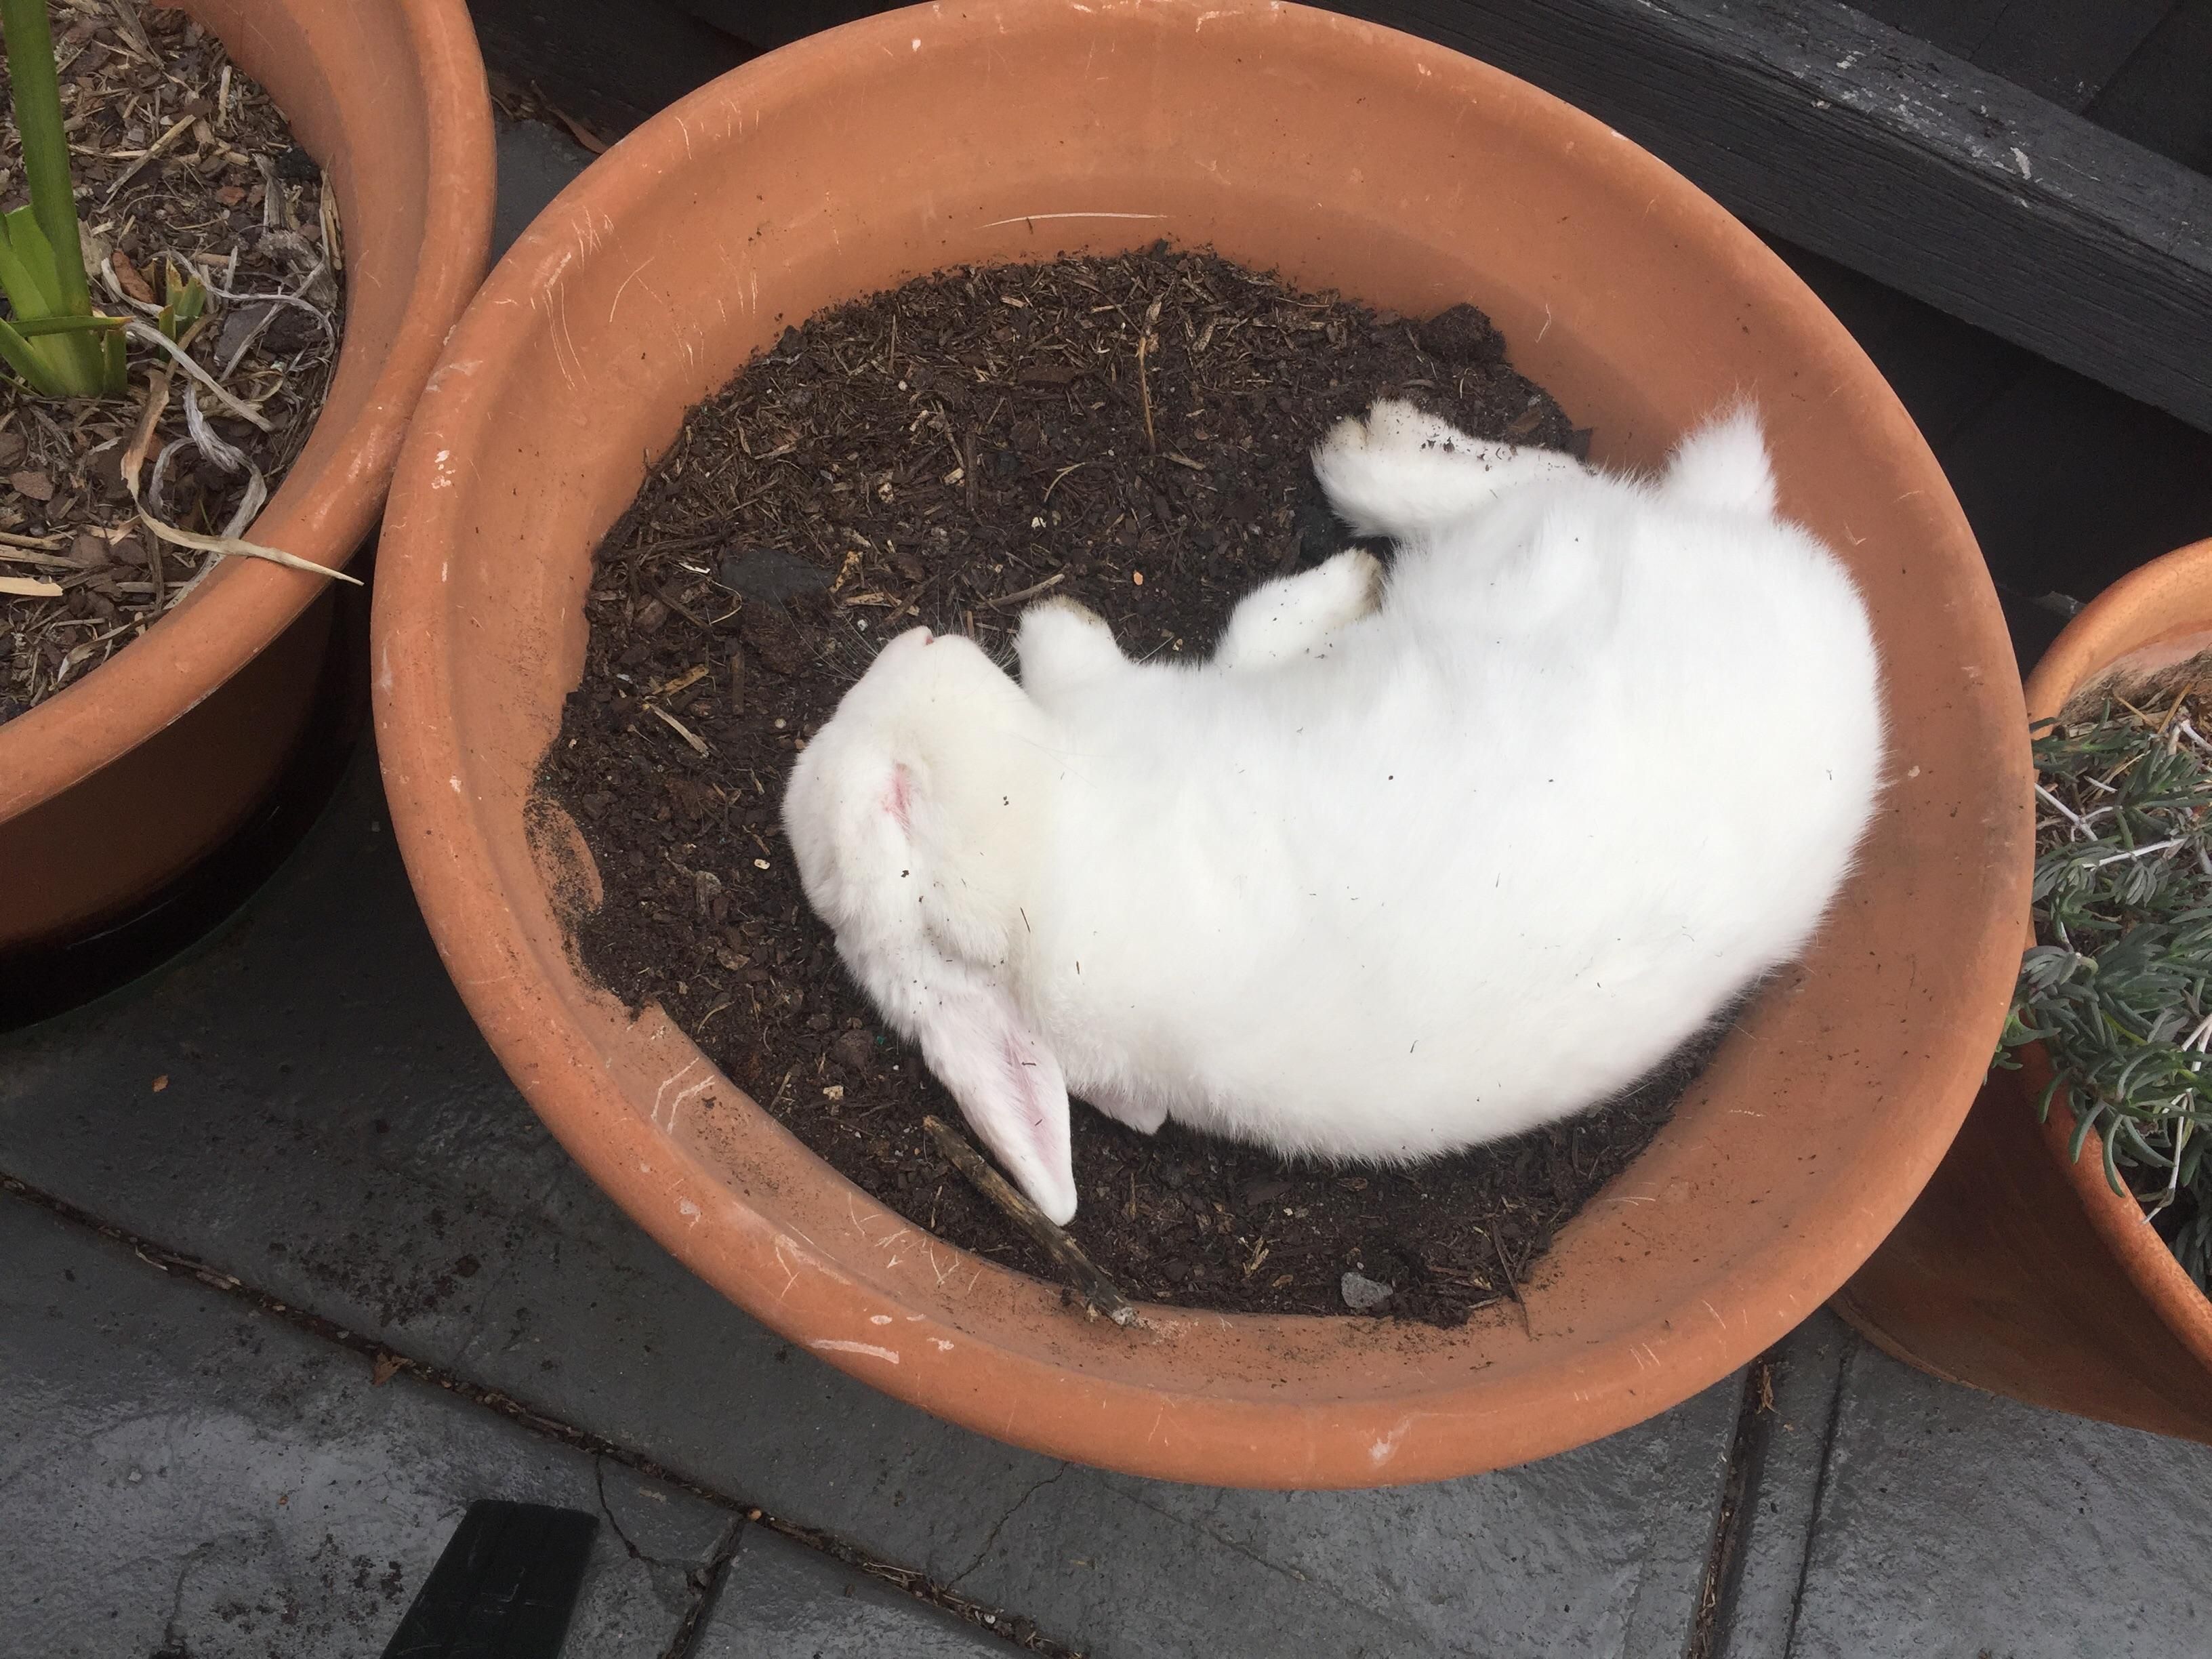 Never slept in this pot until the day I planted bulbs in it.